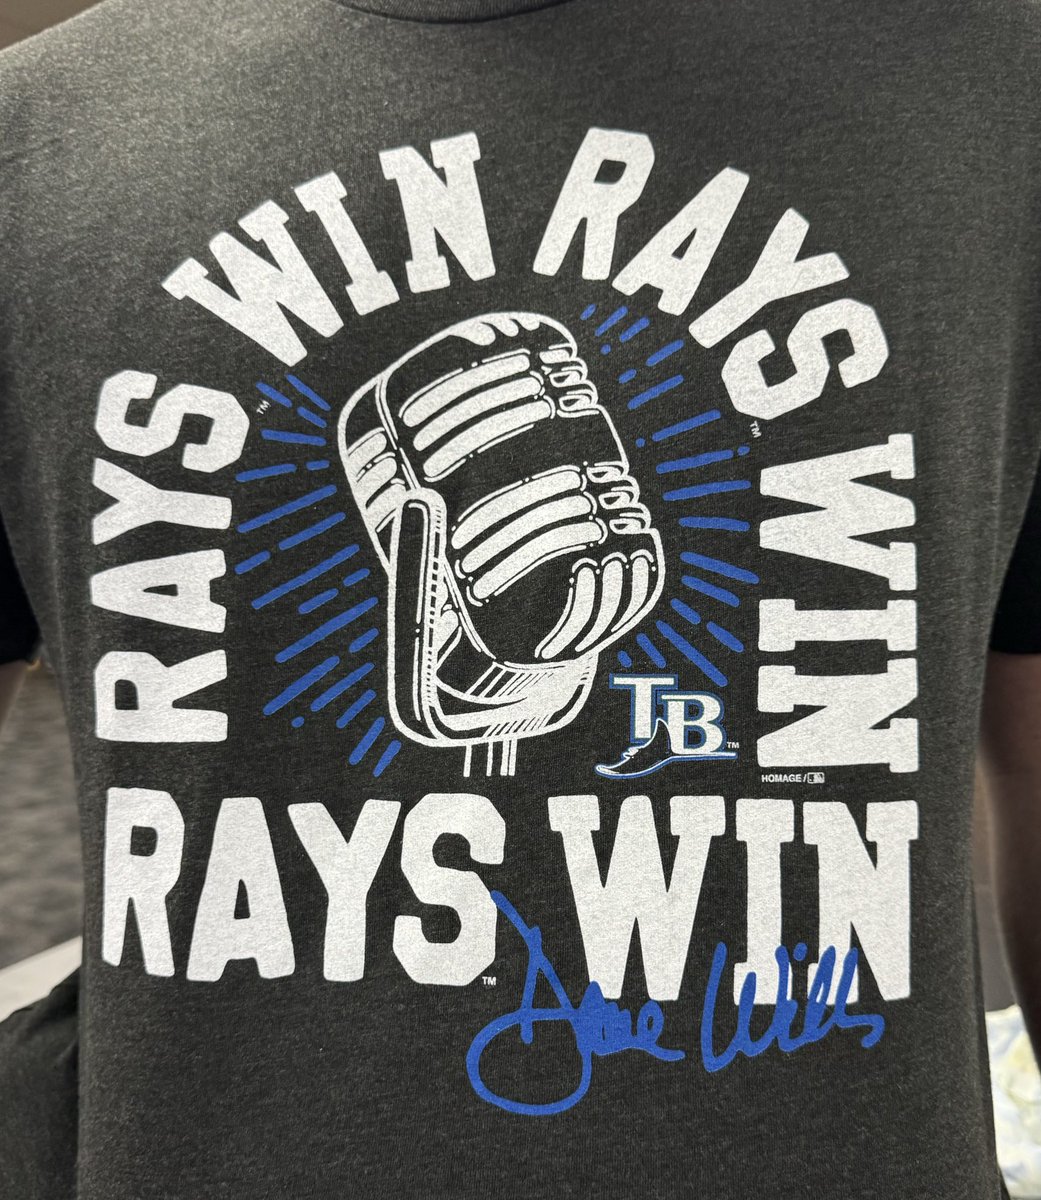 With Dave Wills going into team Hall of Fame, #Rays selling special shirt today, and until supplies last, for $45 at Authentics store and 1st + 3rd base food halls. Proceeds to a new scholarship fund to benefit Pinellas County high school students pursuing broadcasting career